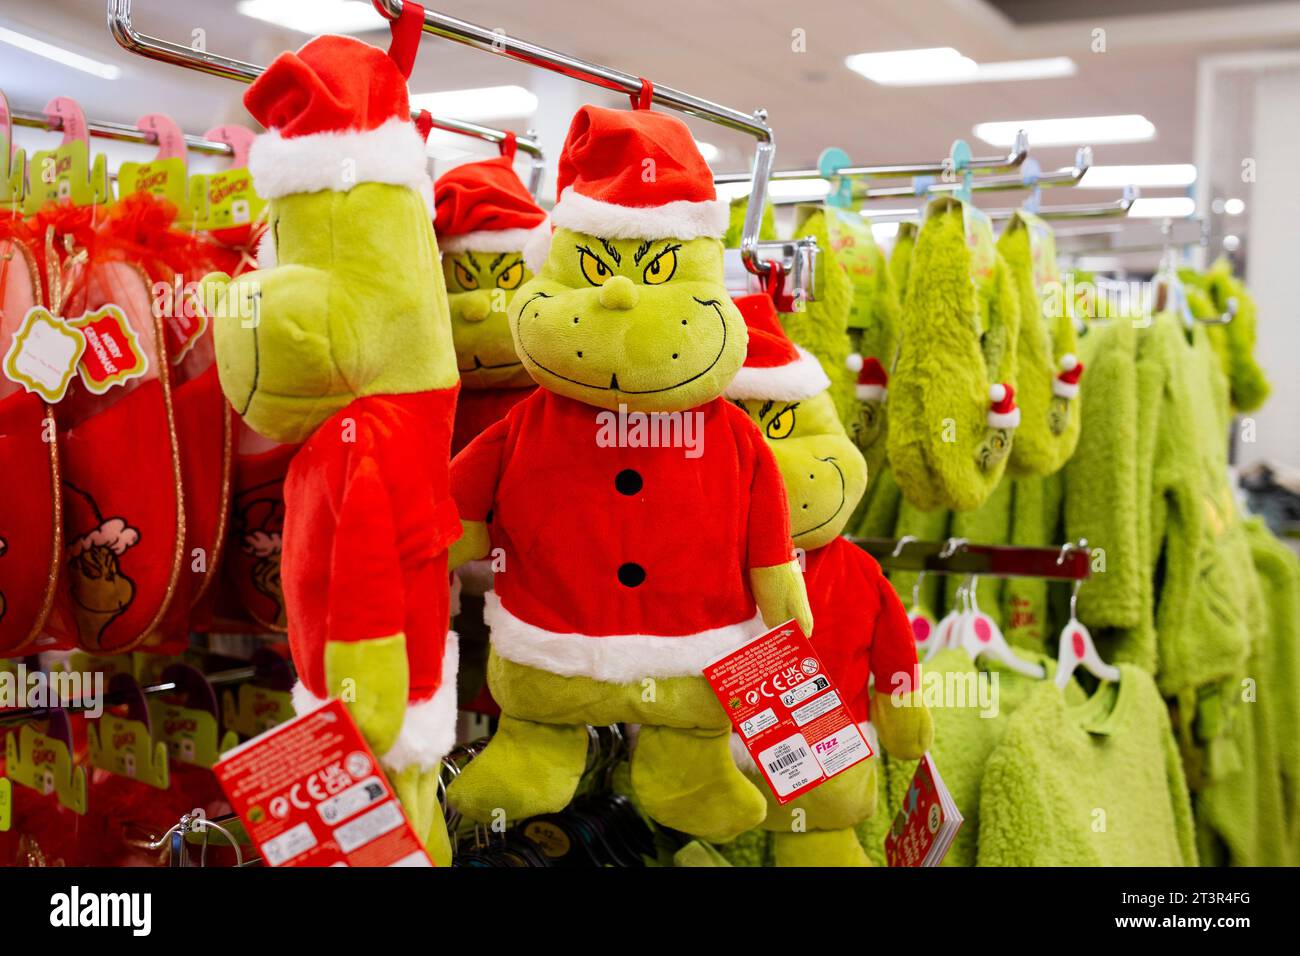 Primark Grinch children's fashions items in Primark store Torquay - The Grinch hot water bottle Stock Photo